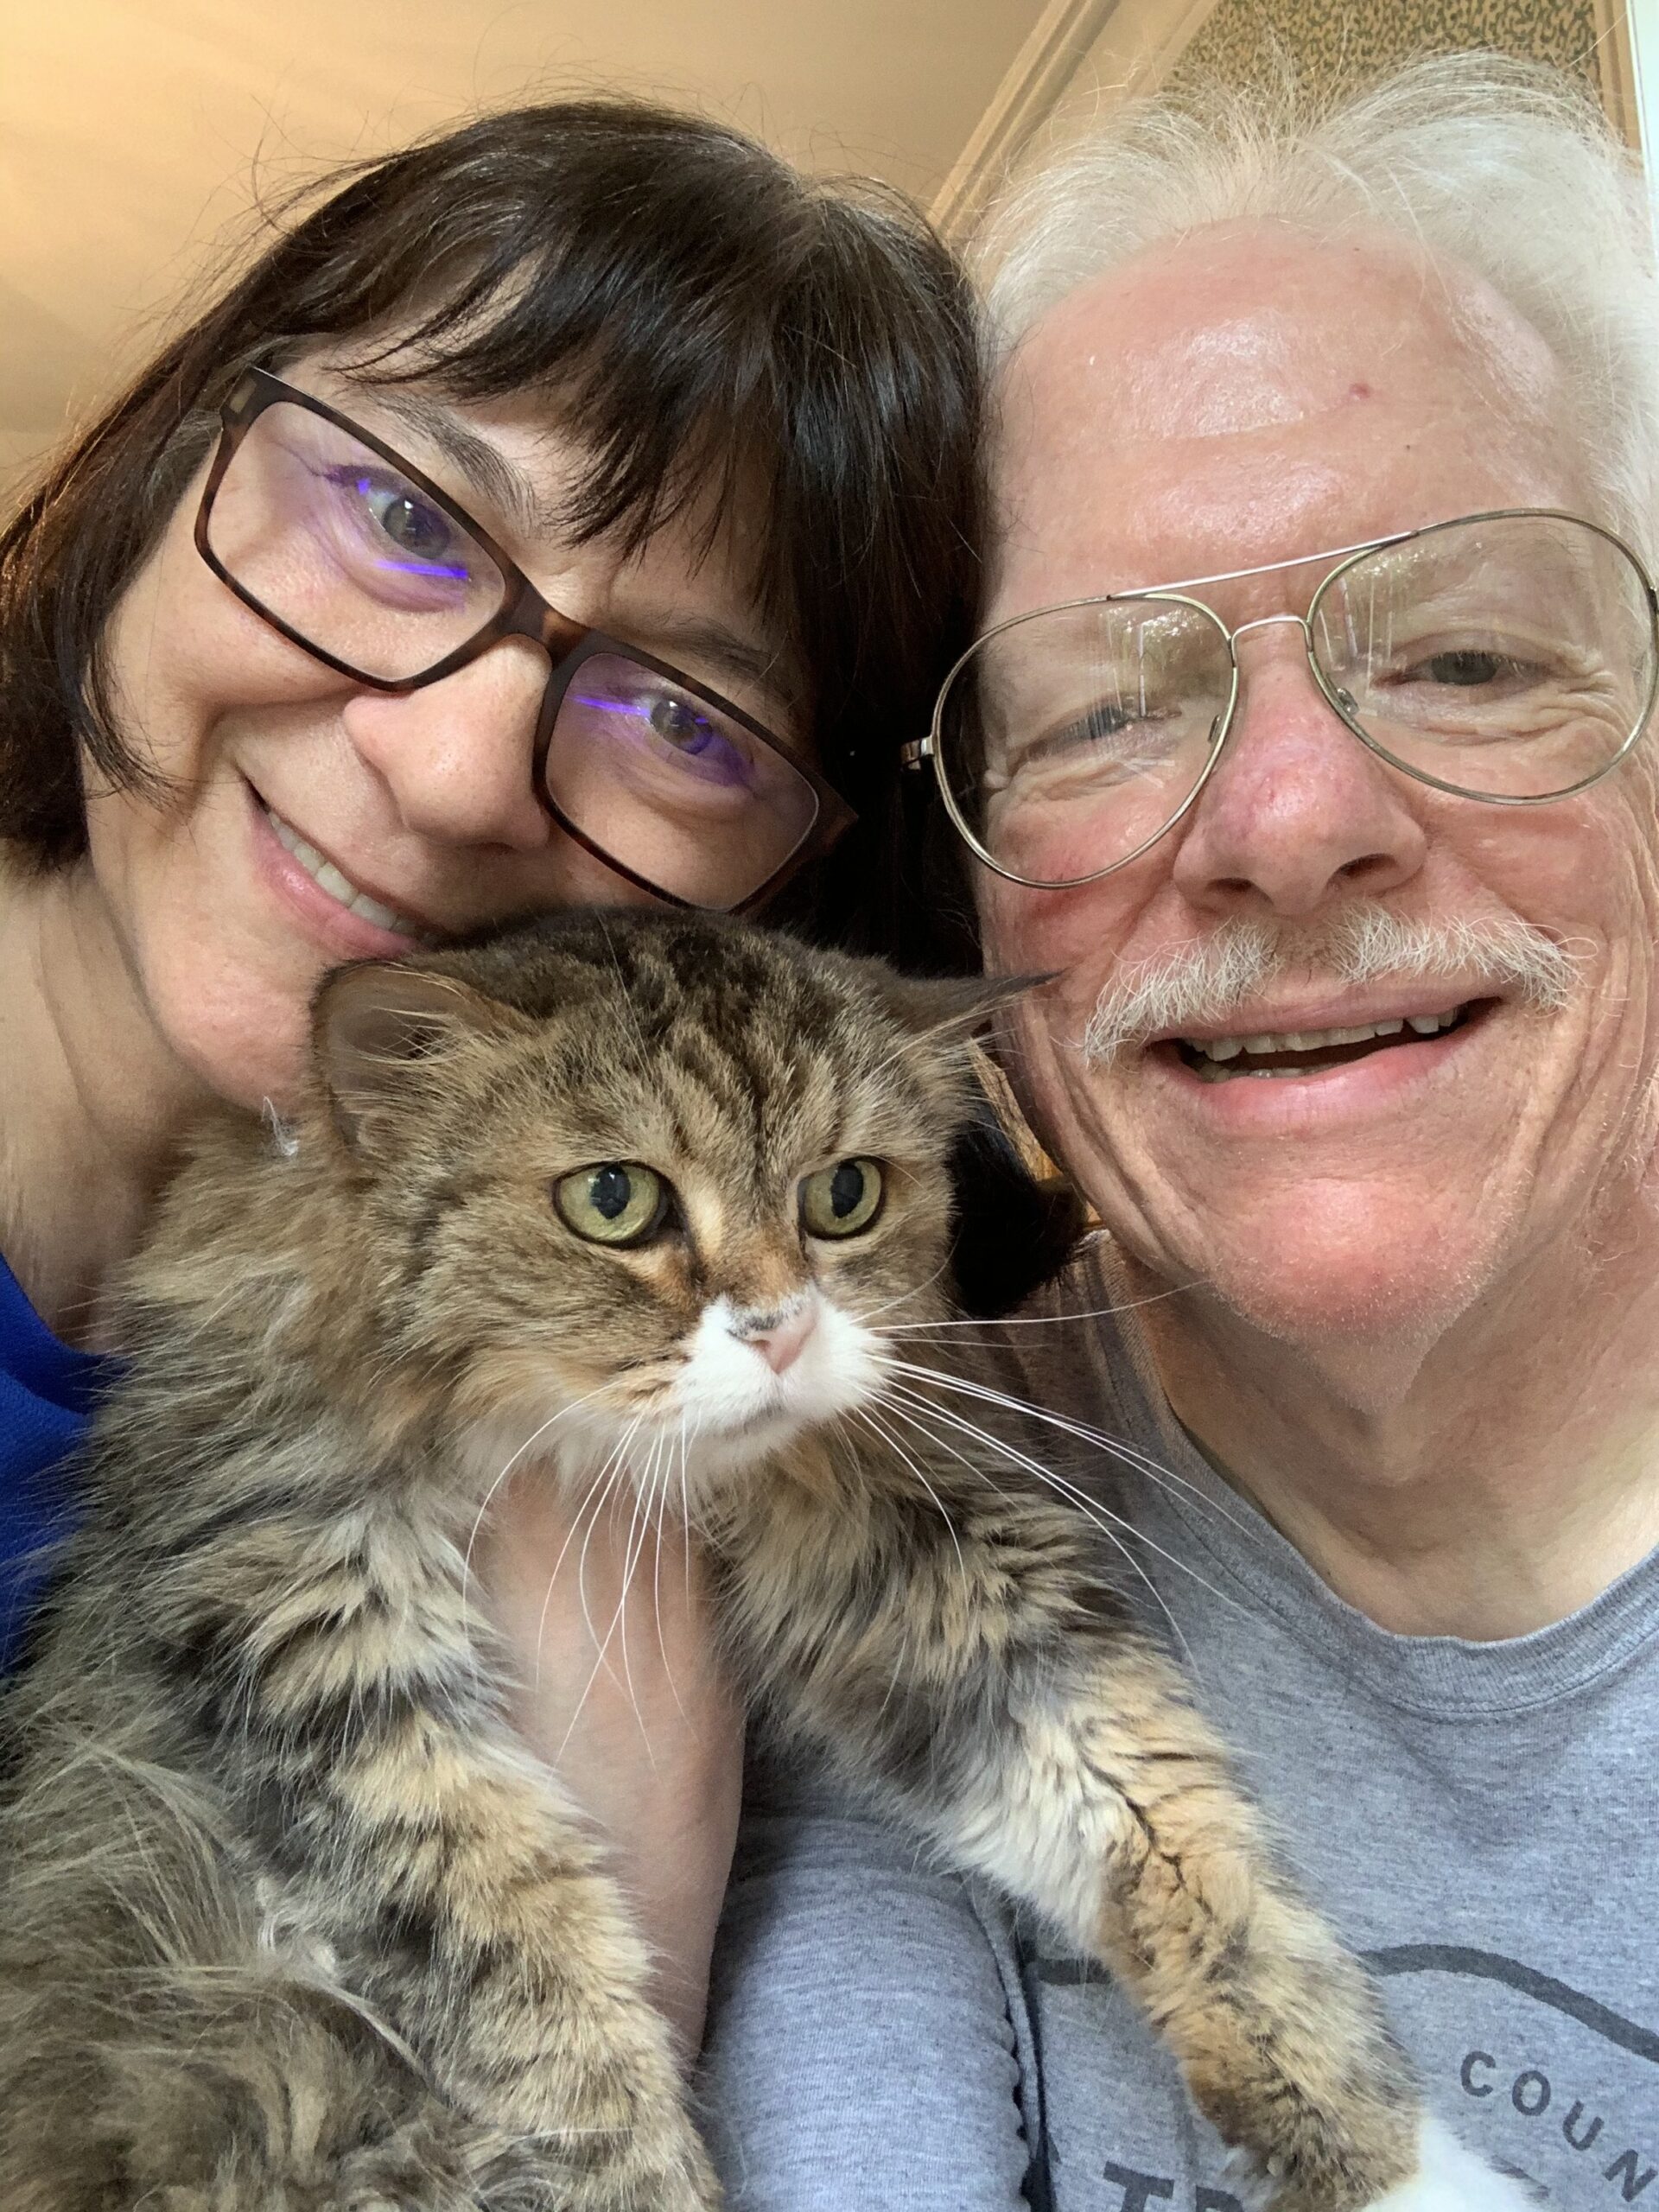 Paul Pratt is pictured with his spouse Denise Chrysler and their pet cat Marbury in this May, 2020 photo.